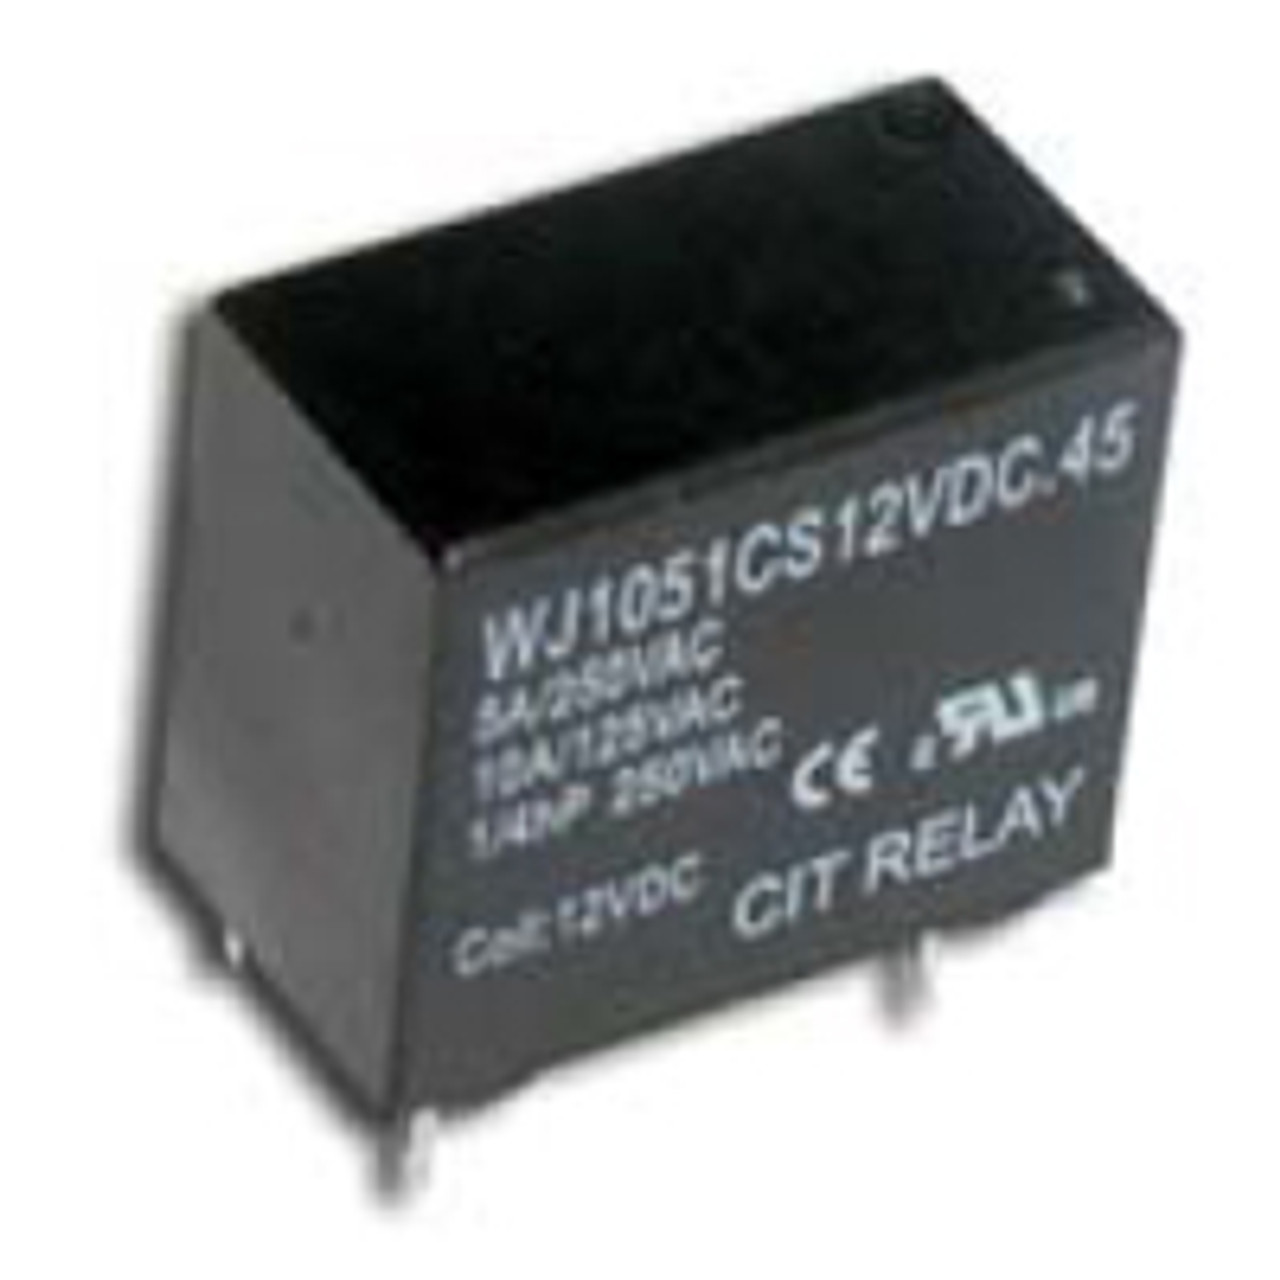 CIT Relay and Switch J1051C6VDC.45 General Purpose Relays